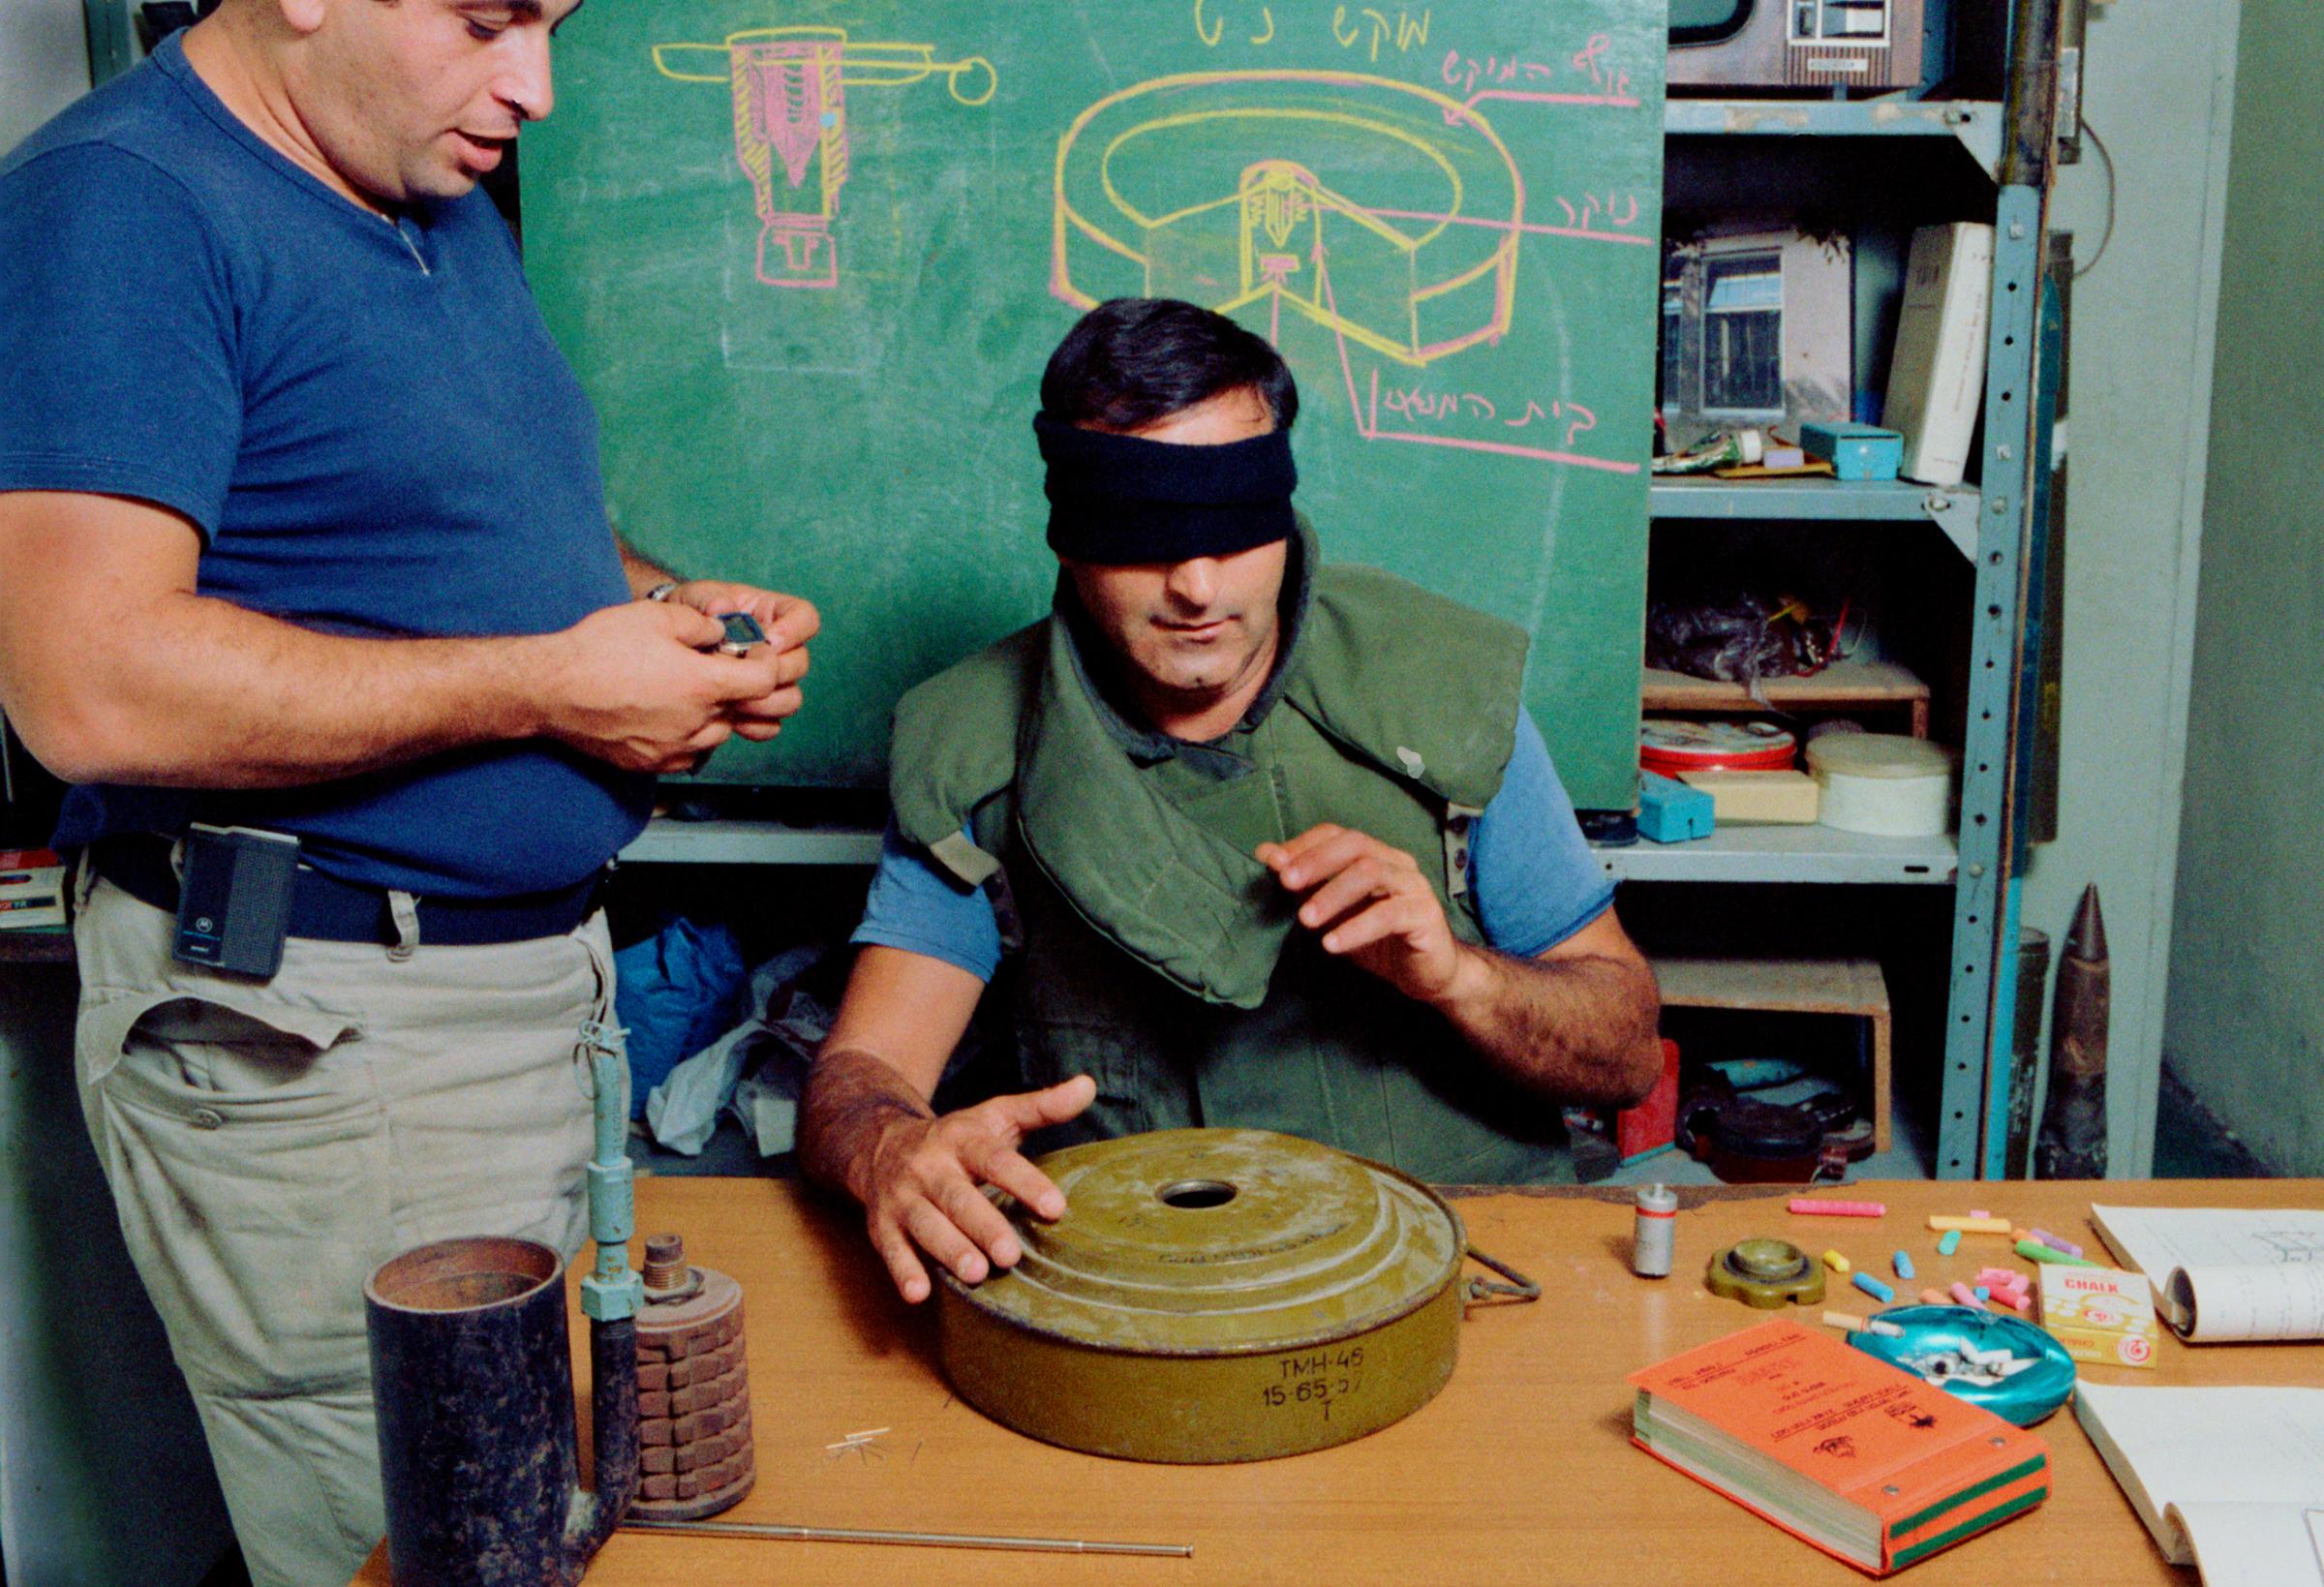 Commander Amedi oversees the test of one bomb squad member who must be able to recognize and disarm a wide variety of bombs by his sense of touch alone. The first example on his table, already successfully dismantled, was a Soviet-style Bouncing Betty, while the one that currently has his full attention is an Israeli-made IM-46 land mine big enough to blow up a truck.